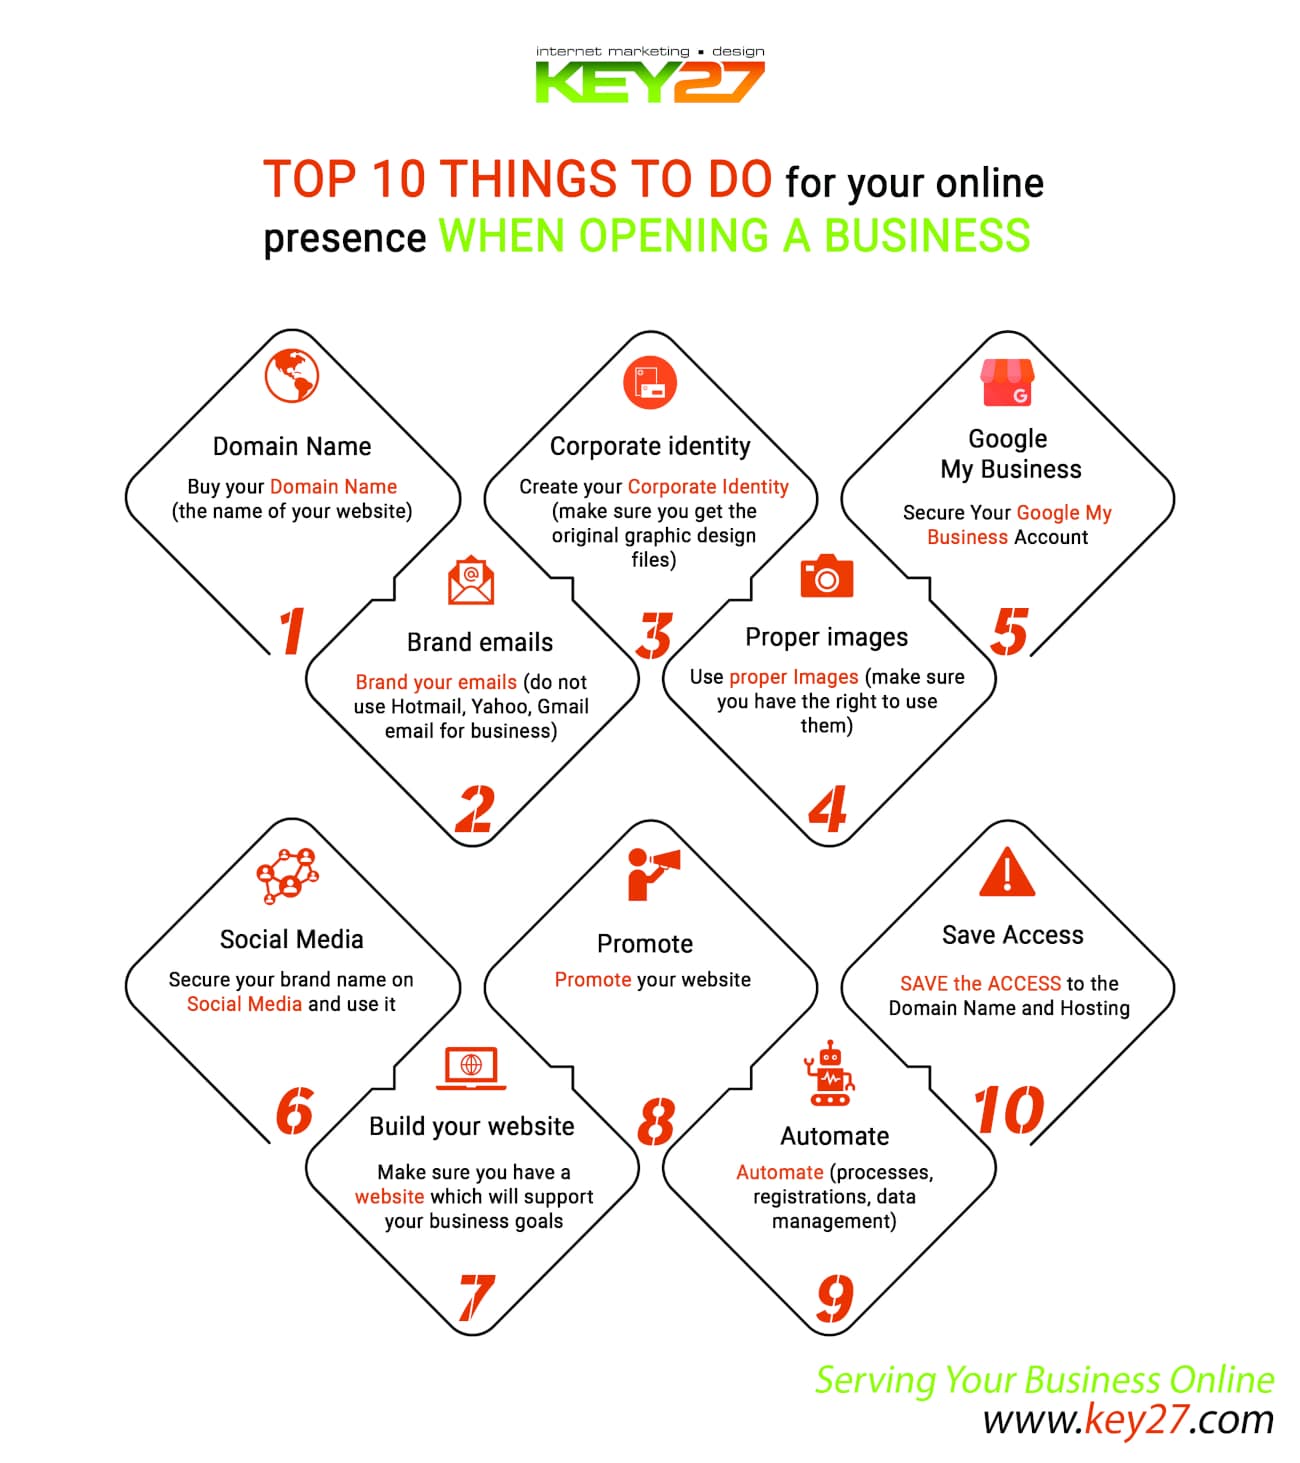 Top 10 online things to consider for start up